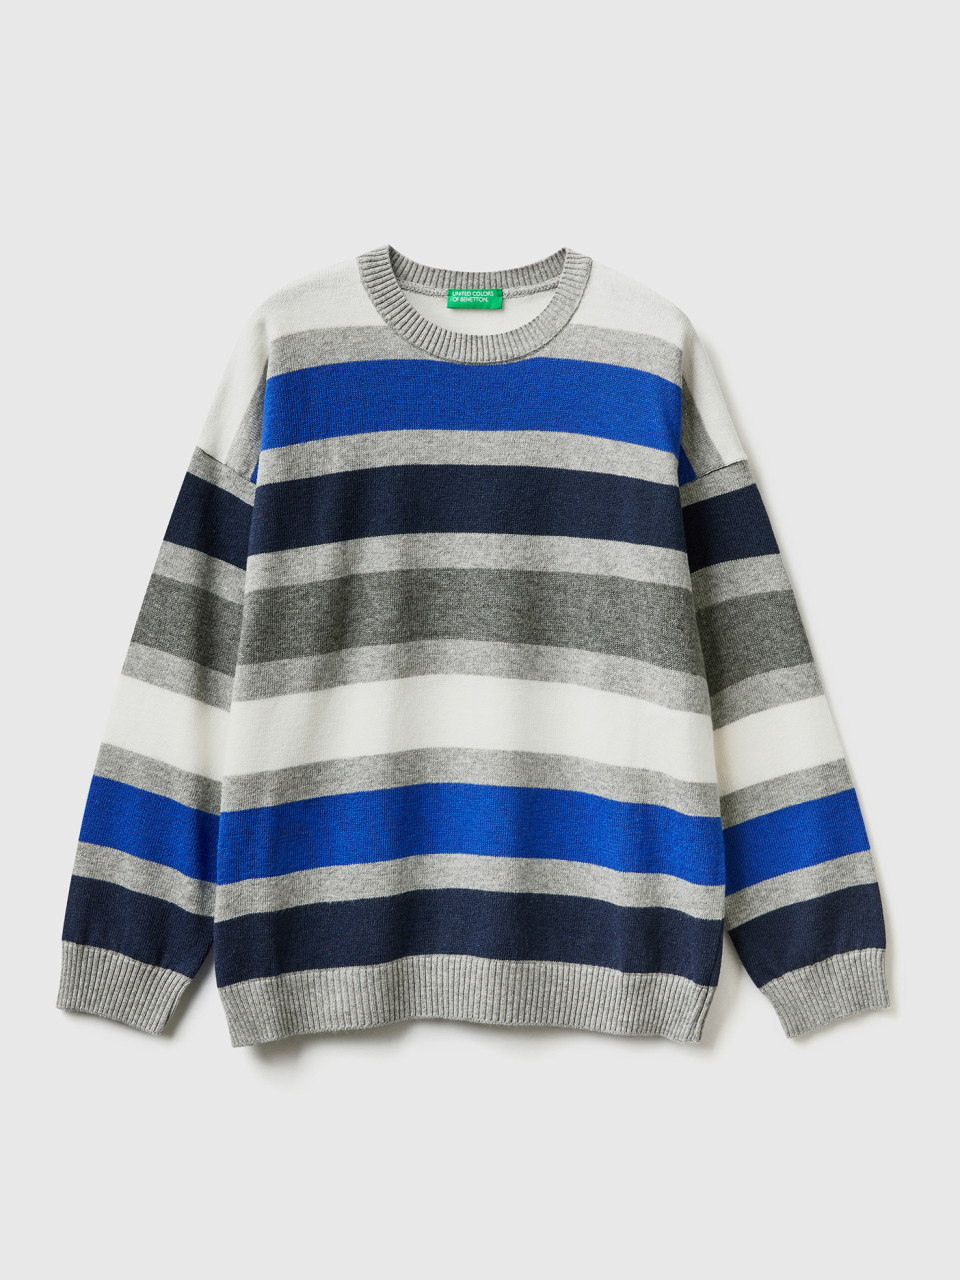 Benetton, Striped Sweater In Wool And Cotton Blend, Light Gray, Kids